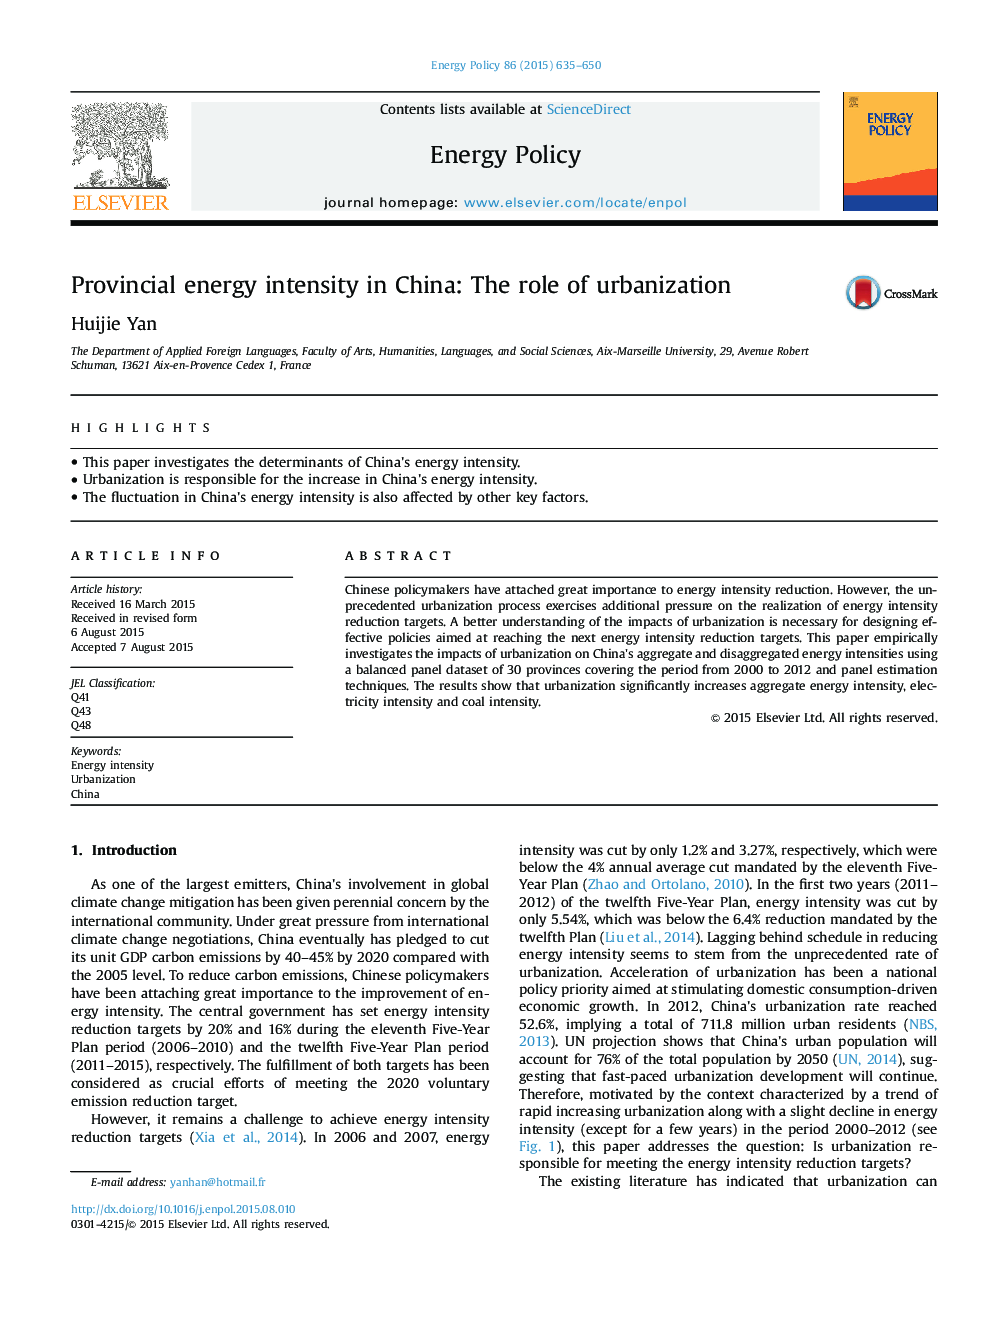 Provincial energy intensity in China: The role of urbanization